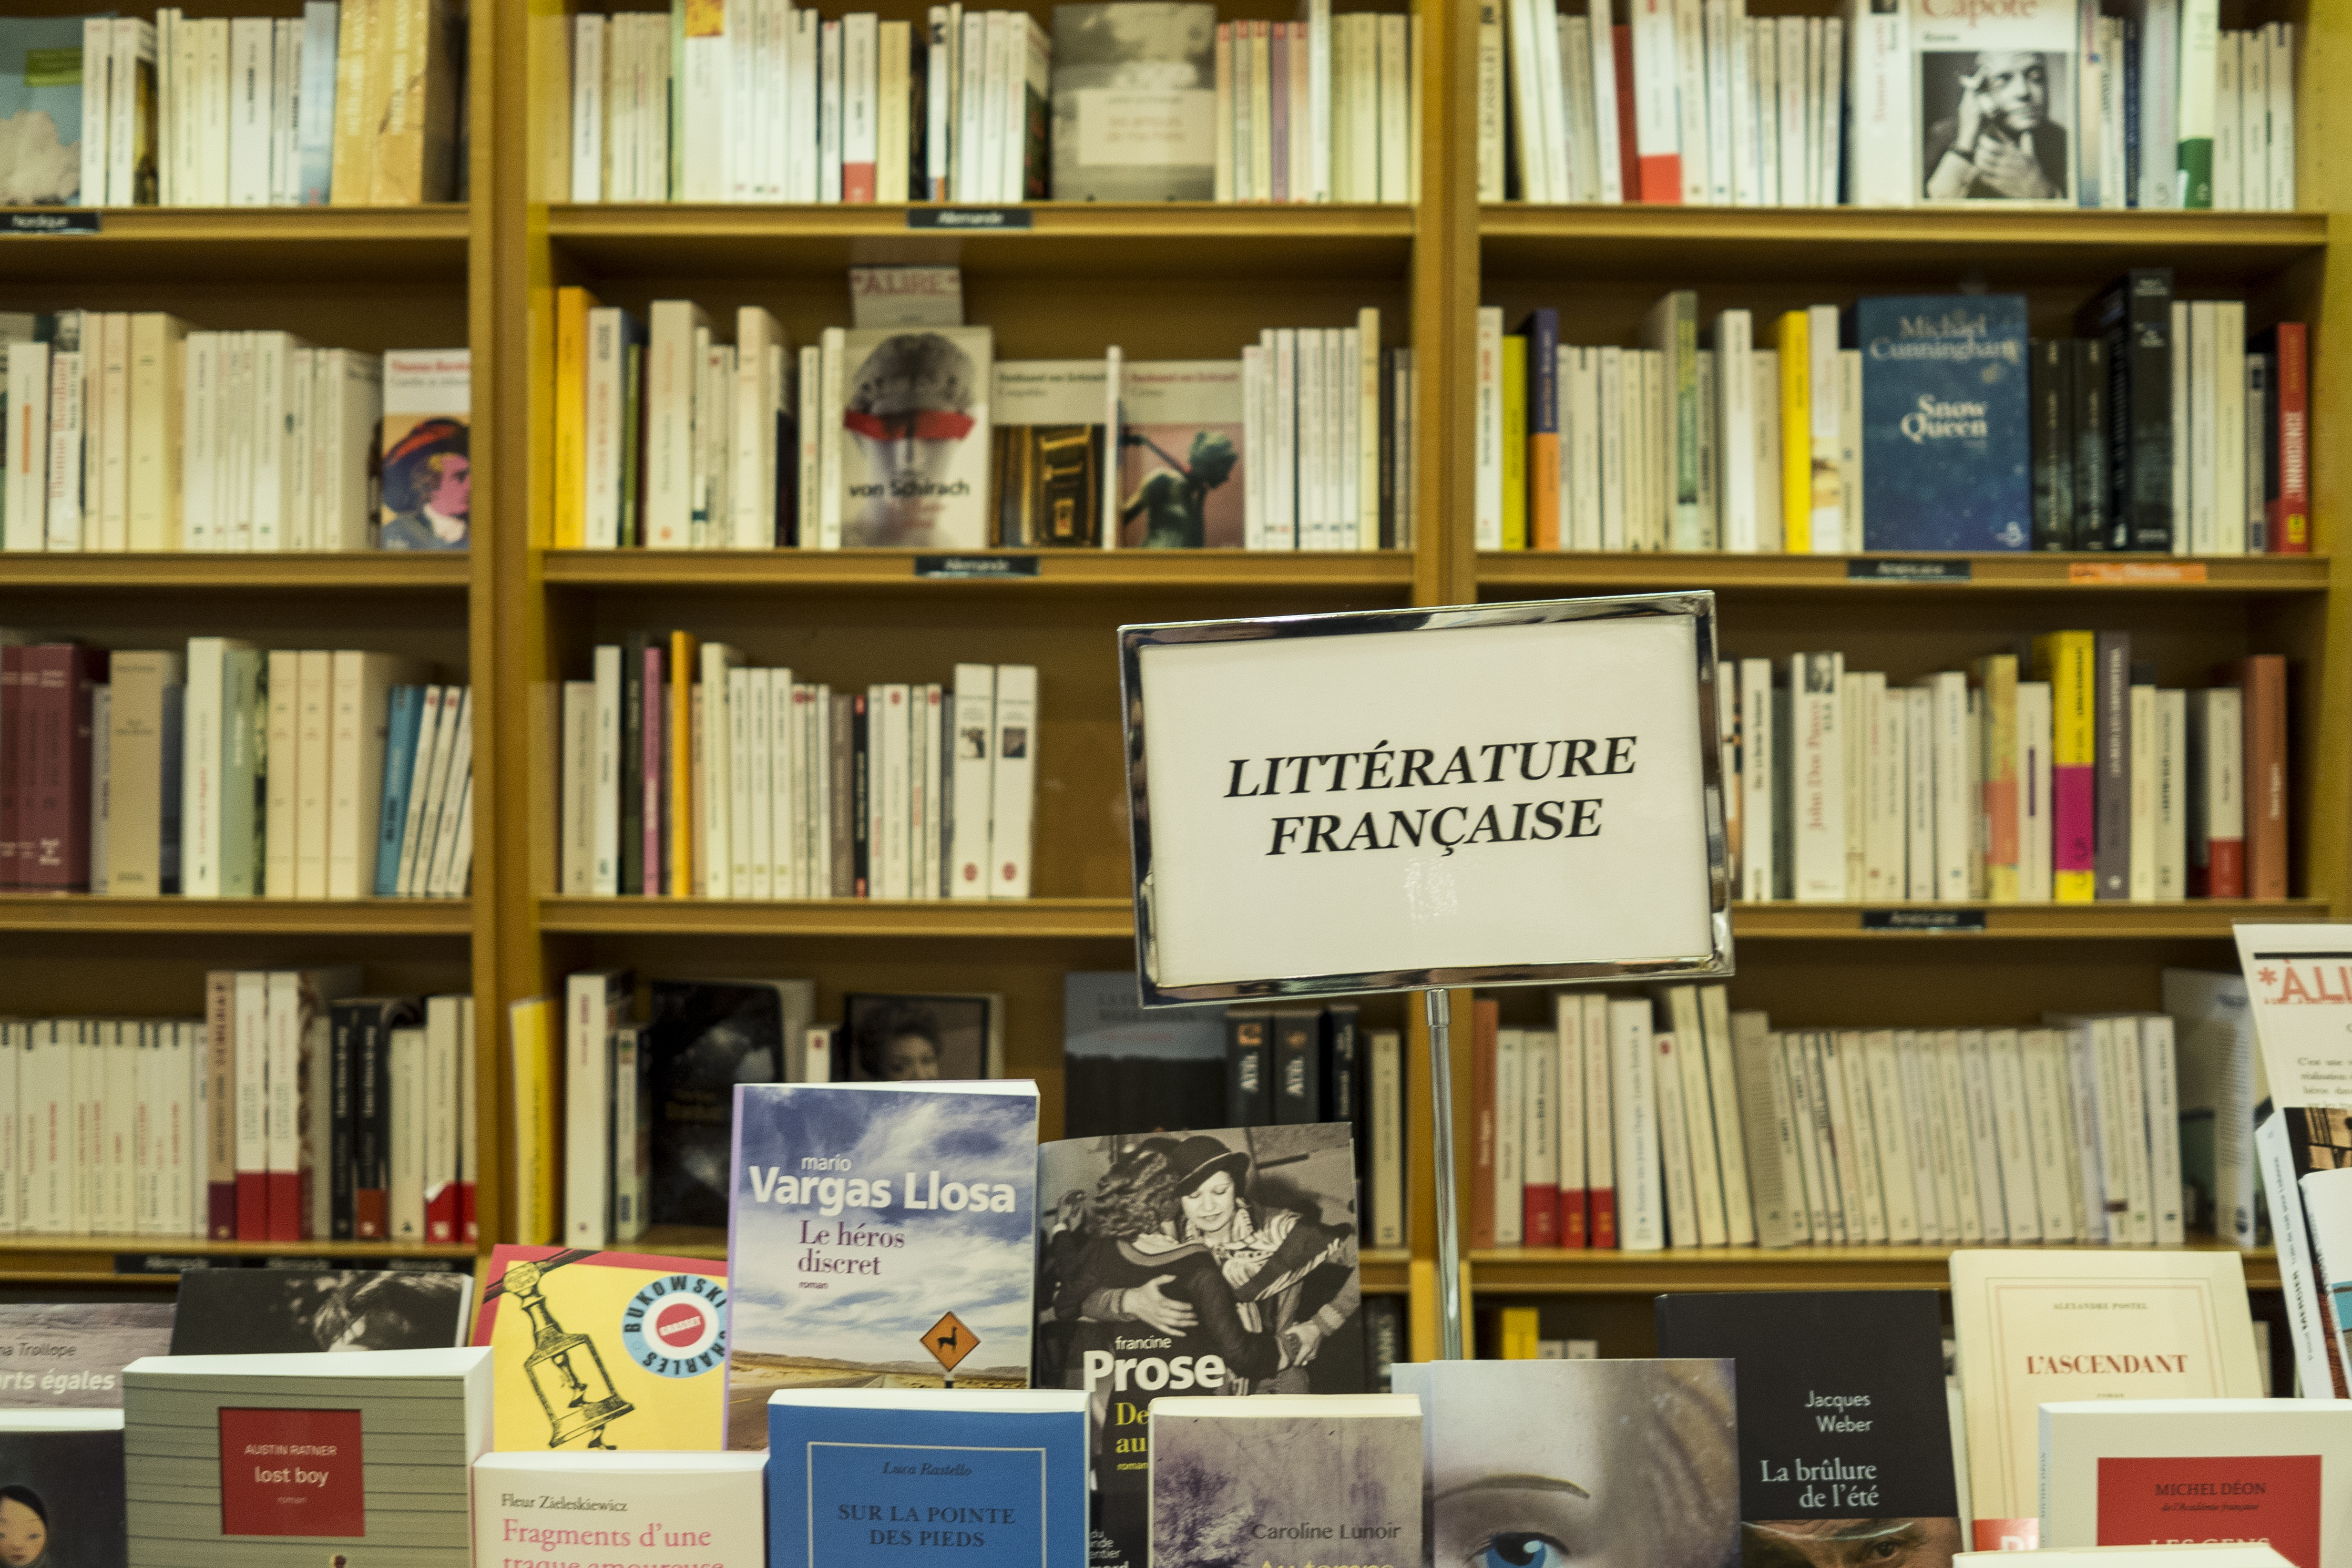 A view of several bookshelves in a bookstore stocked and organized neatly behind a row of display books with covers facing forward, a slightly askew metal sign-holder reads "littérature française."